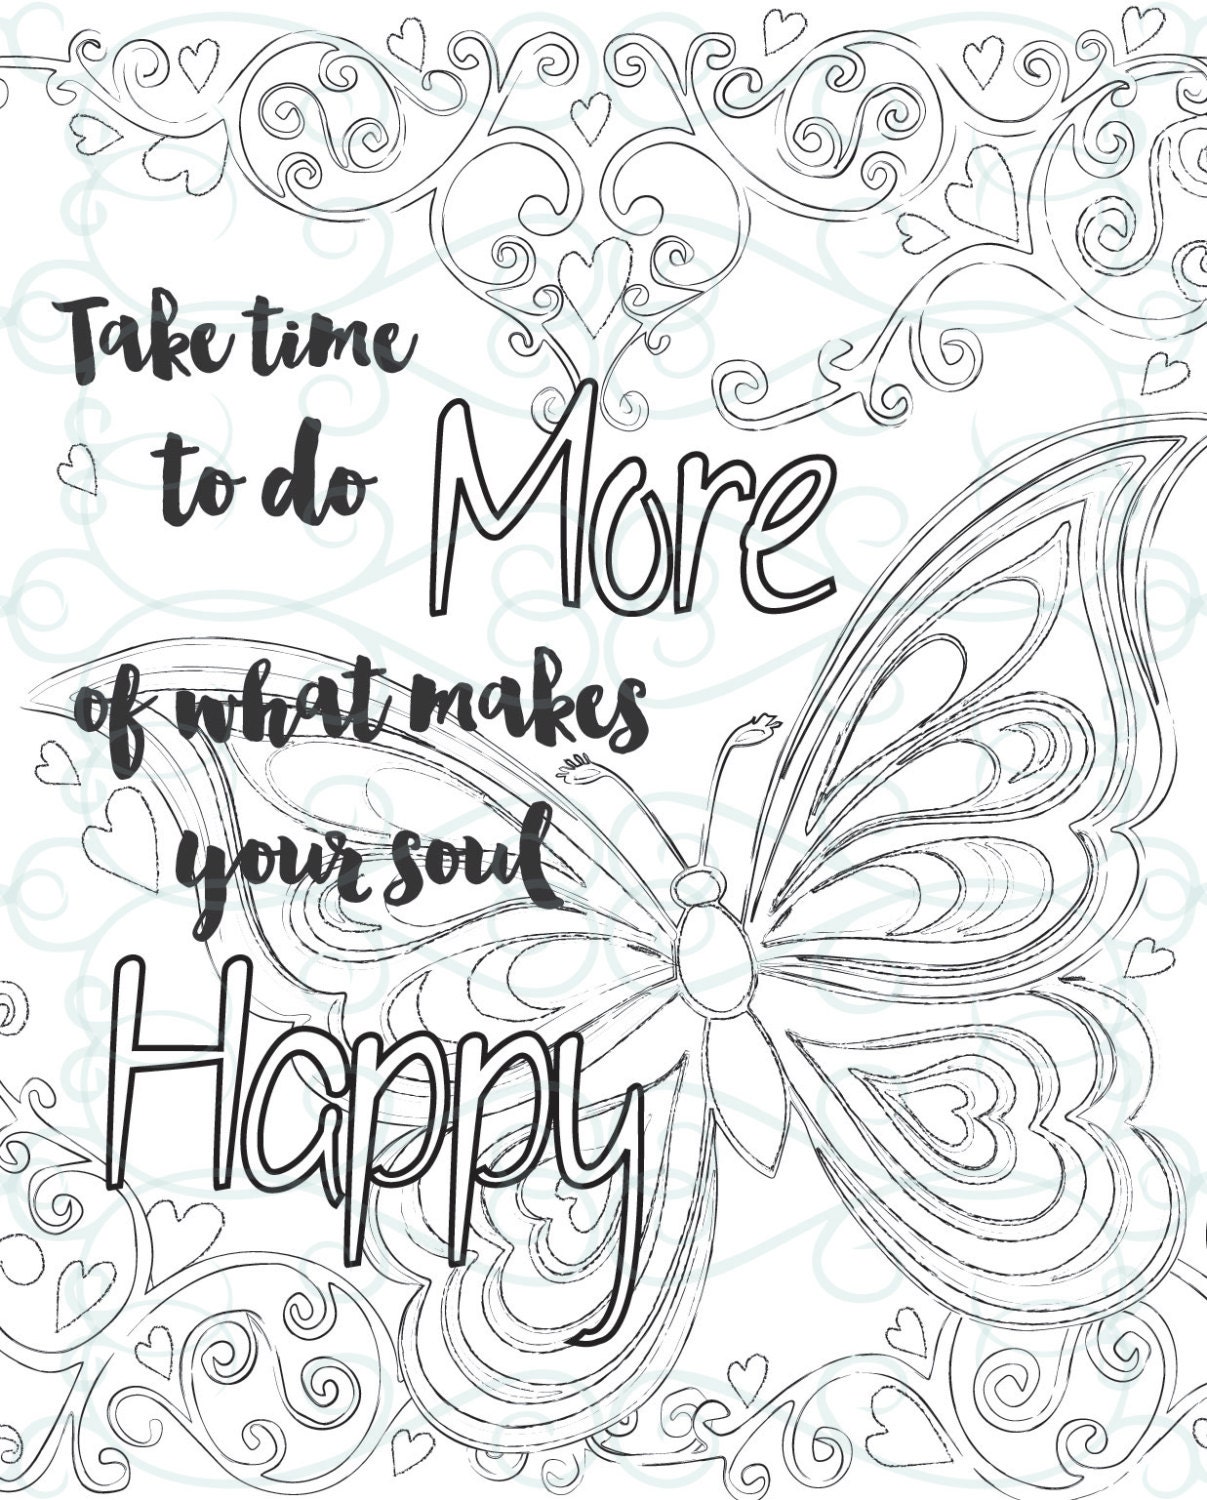 Gambar Adult Inspirational Coloring Page Printable 07 01 Soul Happy ...